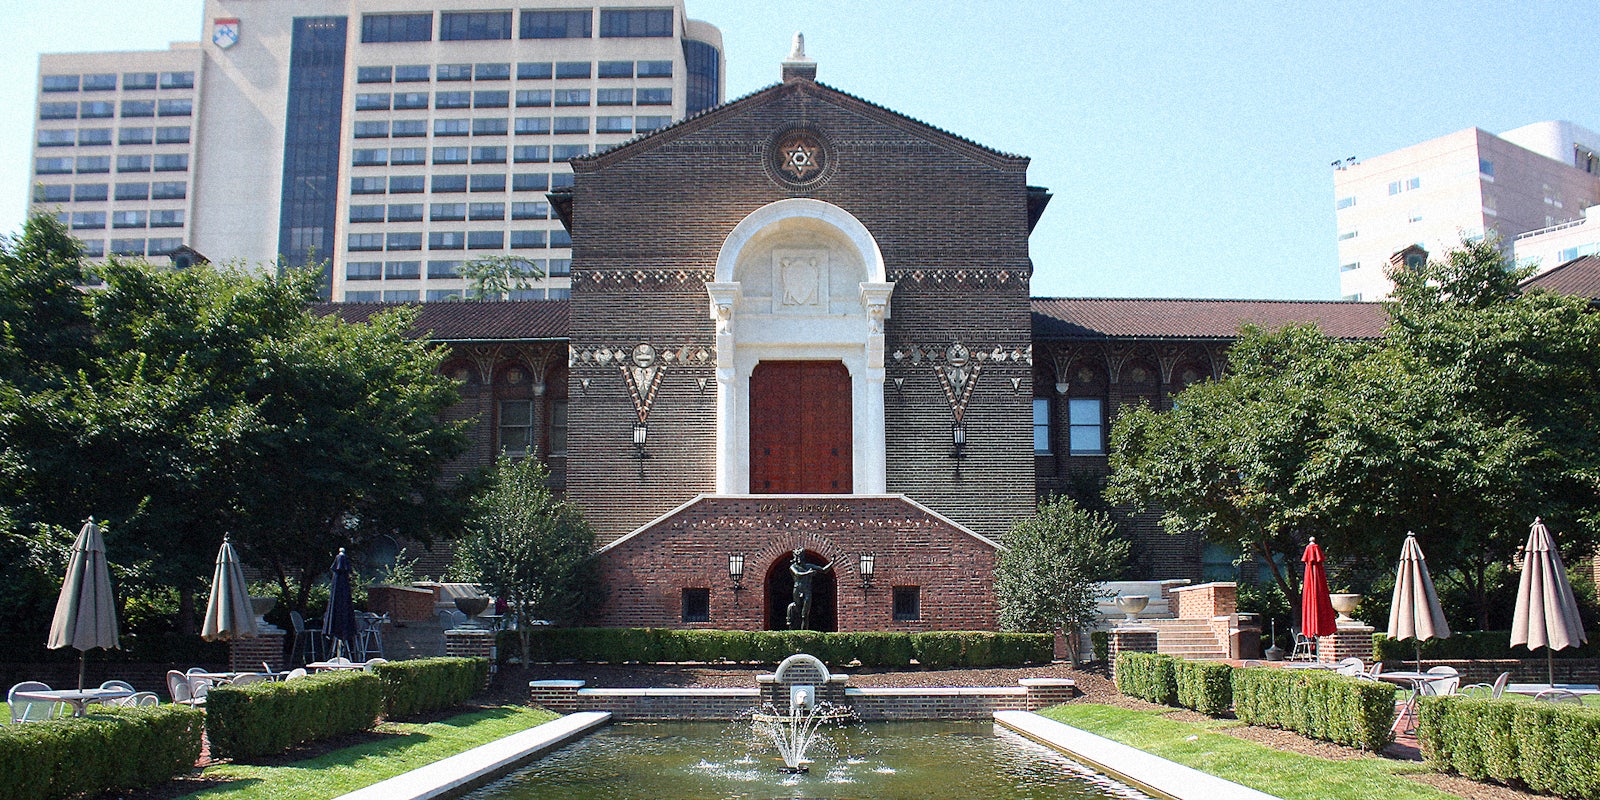 The exterior of a museum with water fountain in foreground.